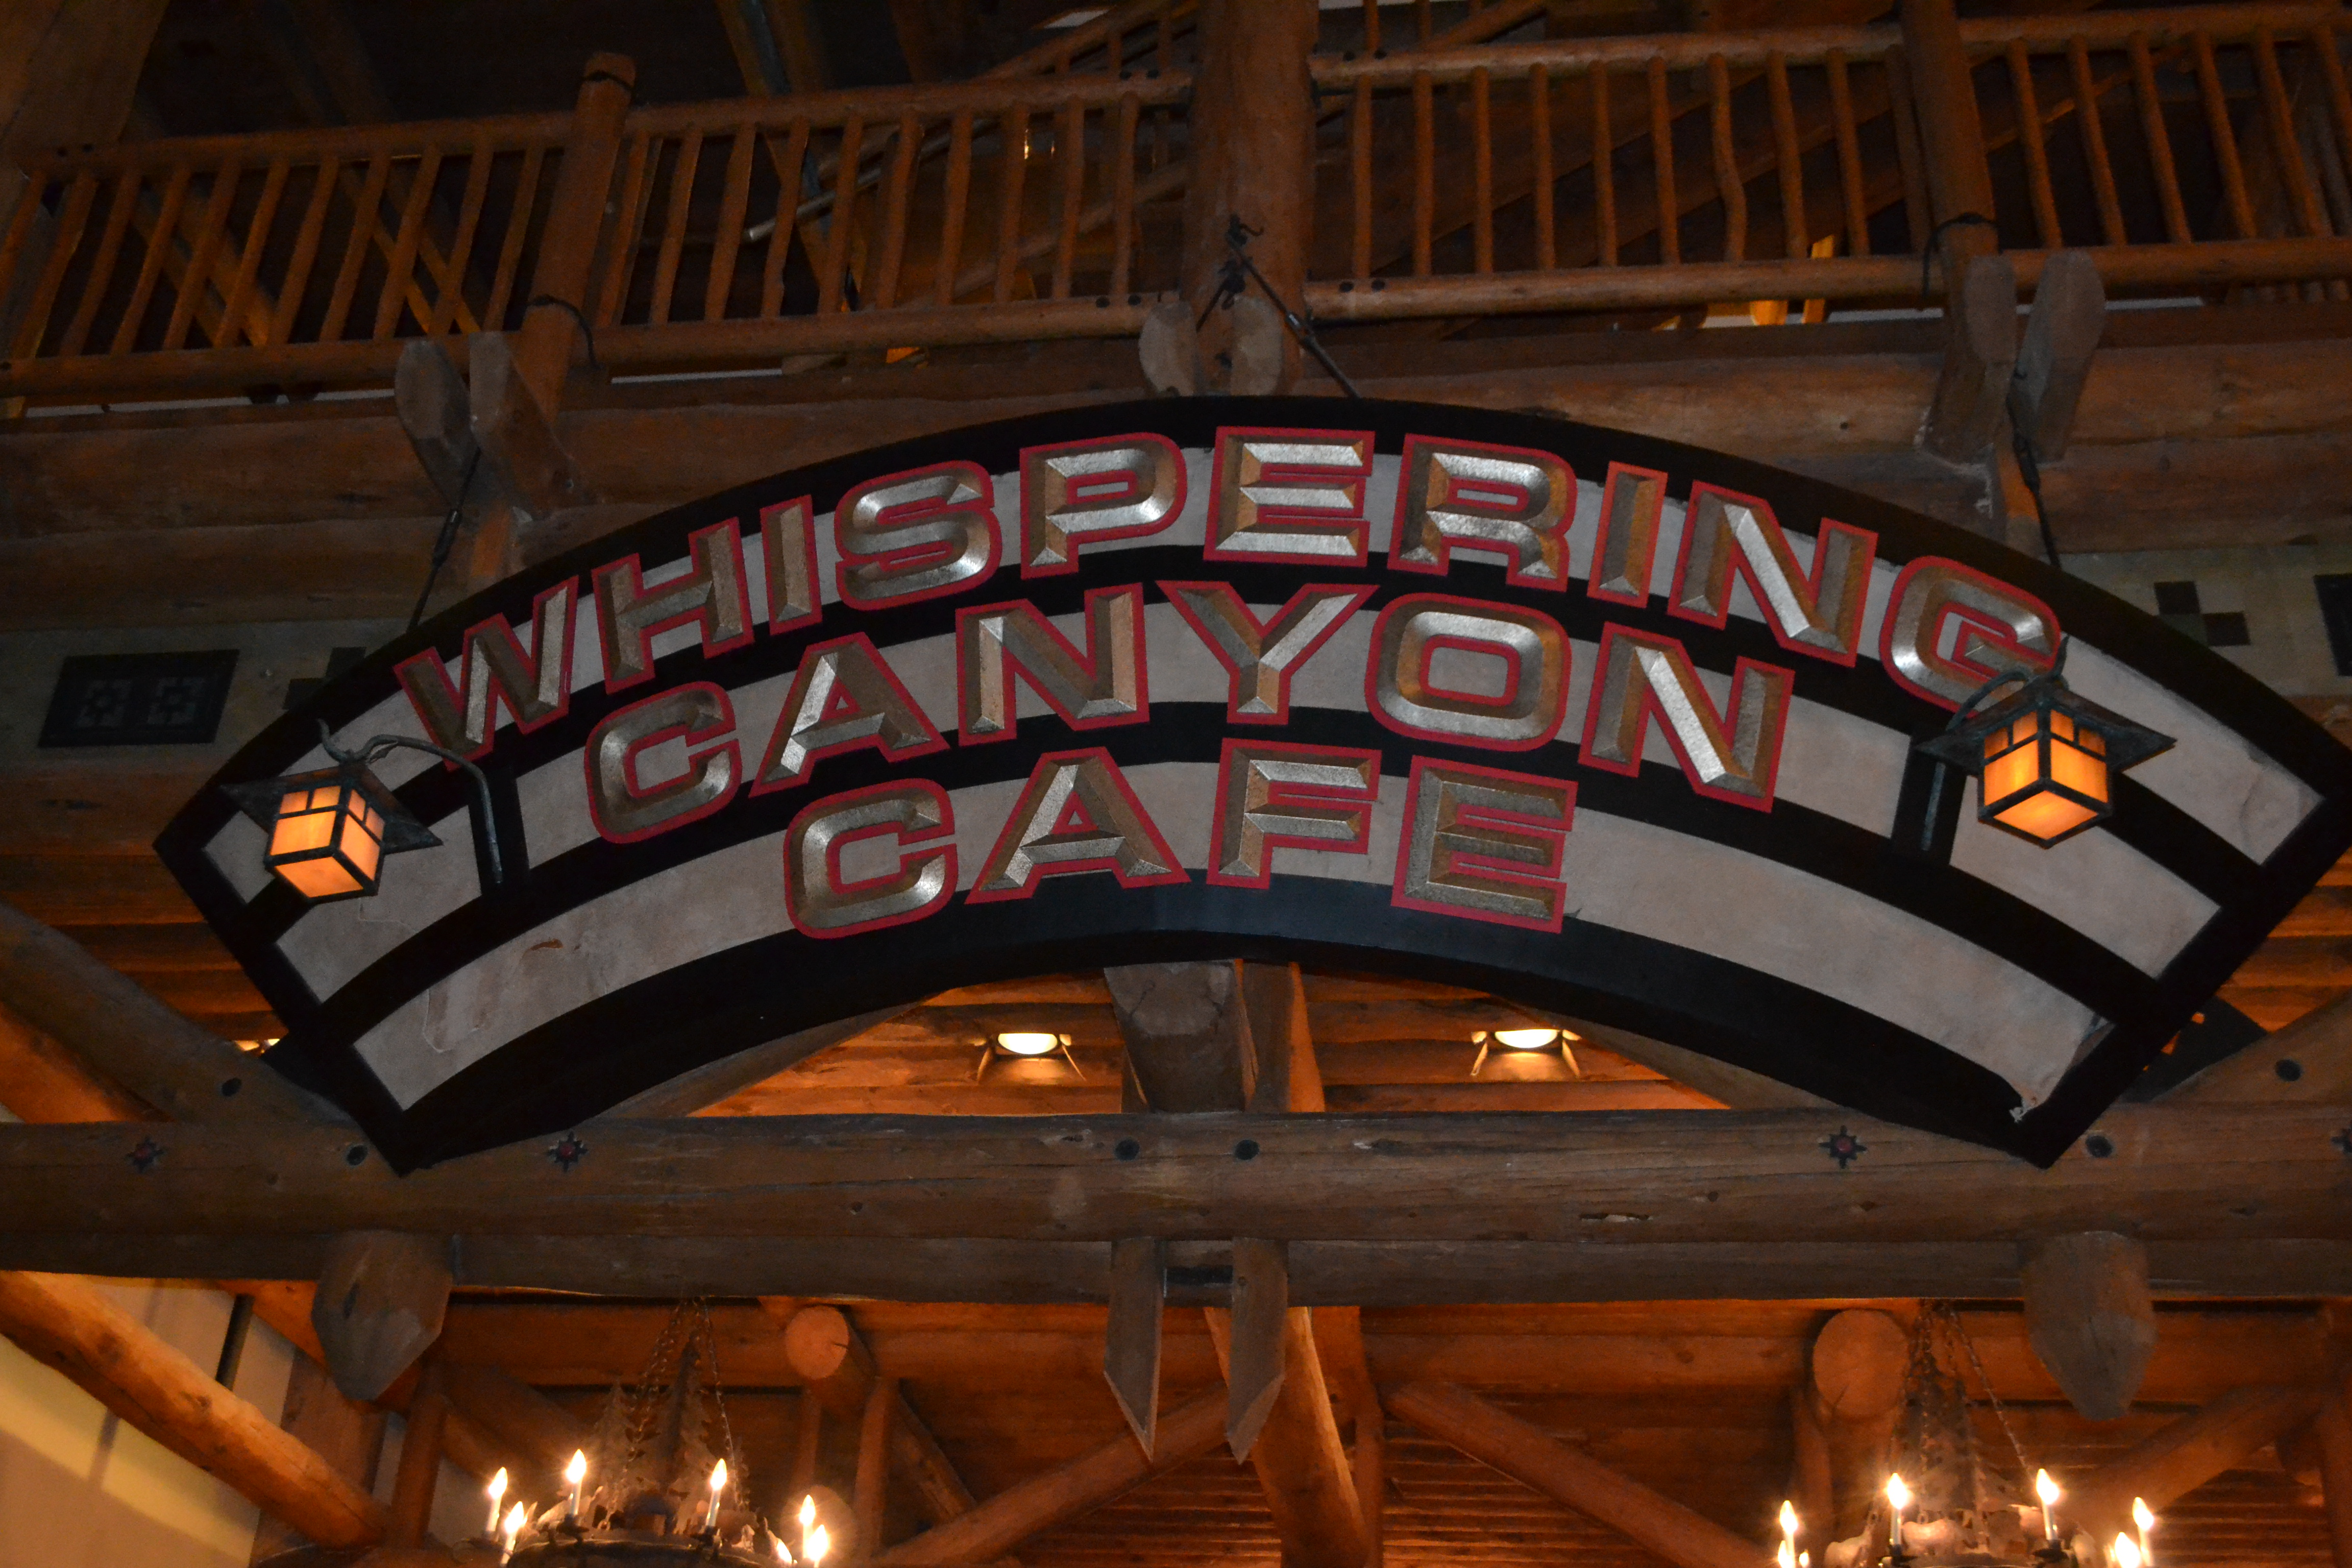 Whispering Canyon Café Dinner Review